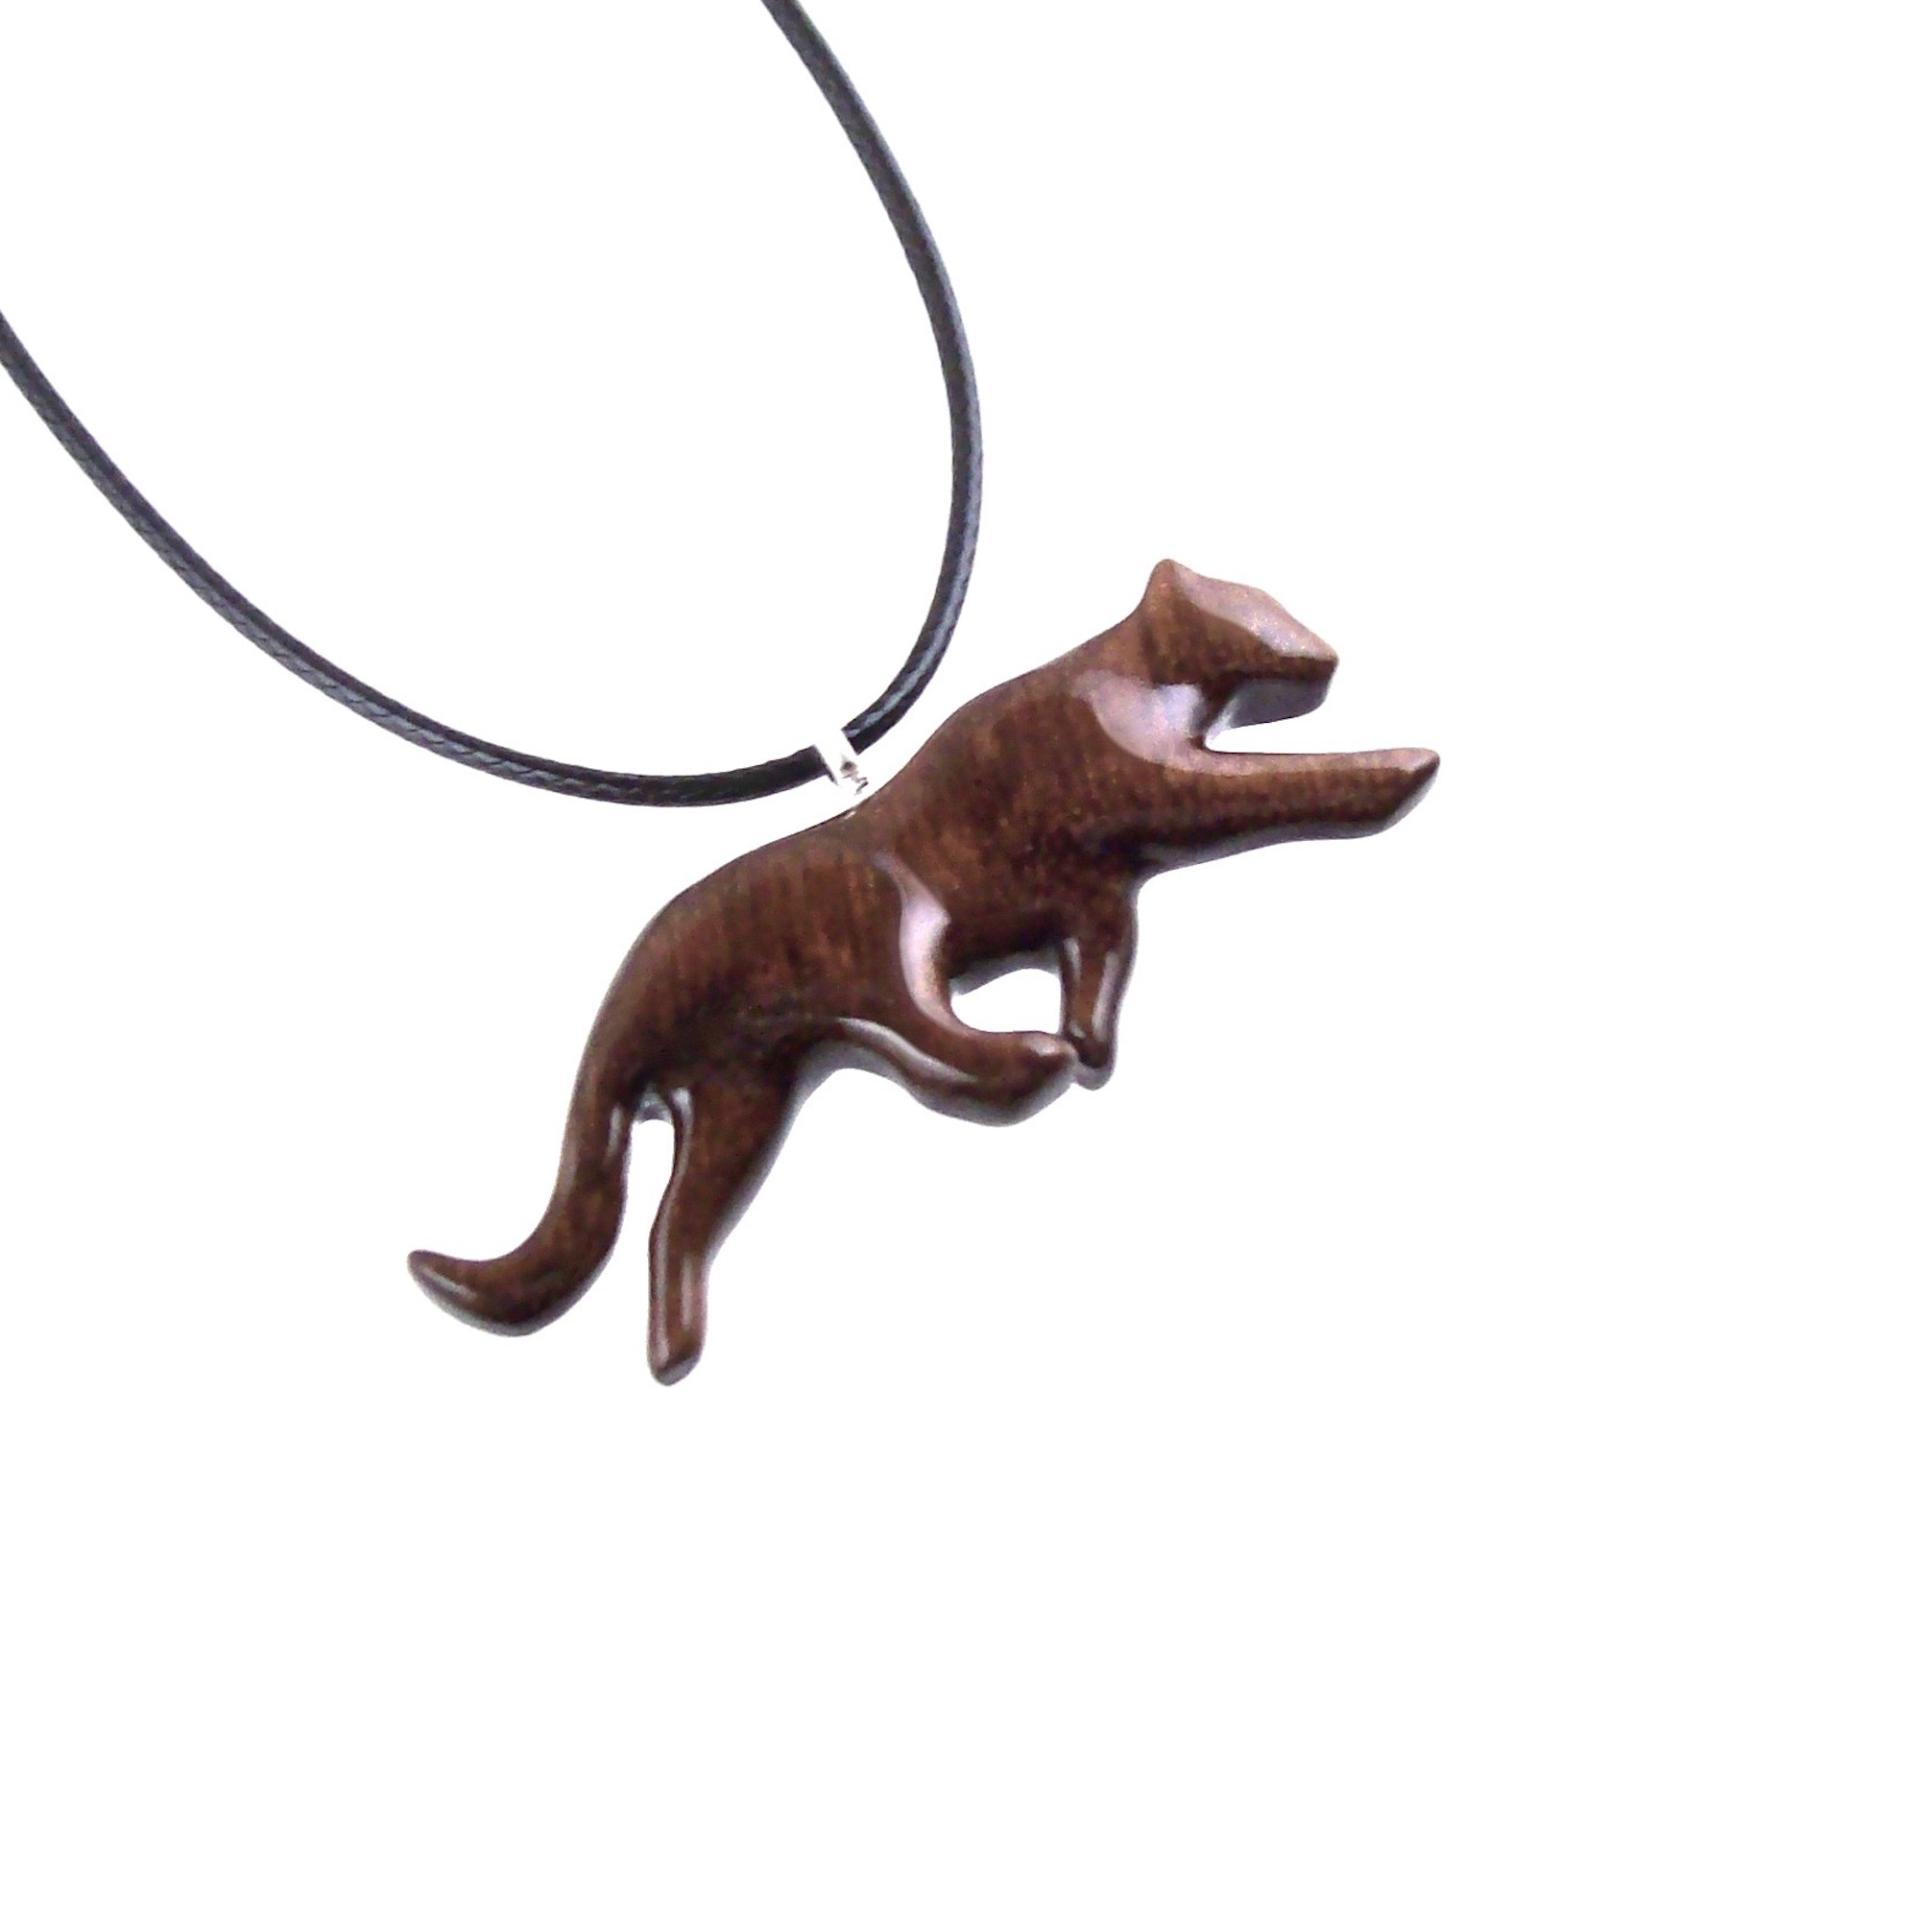 Jaguar Pendant, Hand Carved Wooden Panther Necklace, Cougar, Mountain Lion, Animal Jewelry for Men or Women, Gift for Him Her